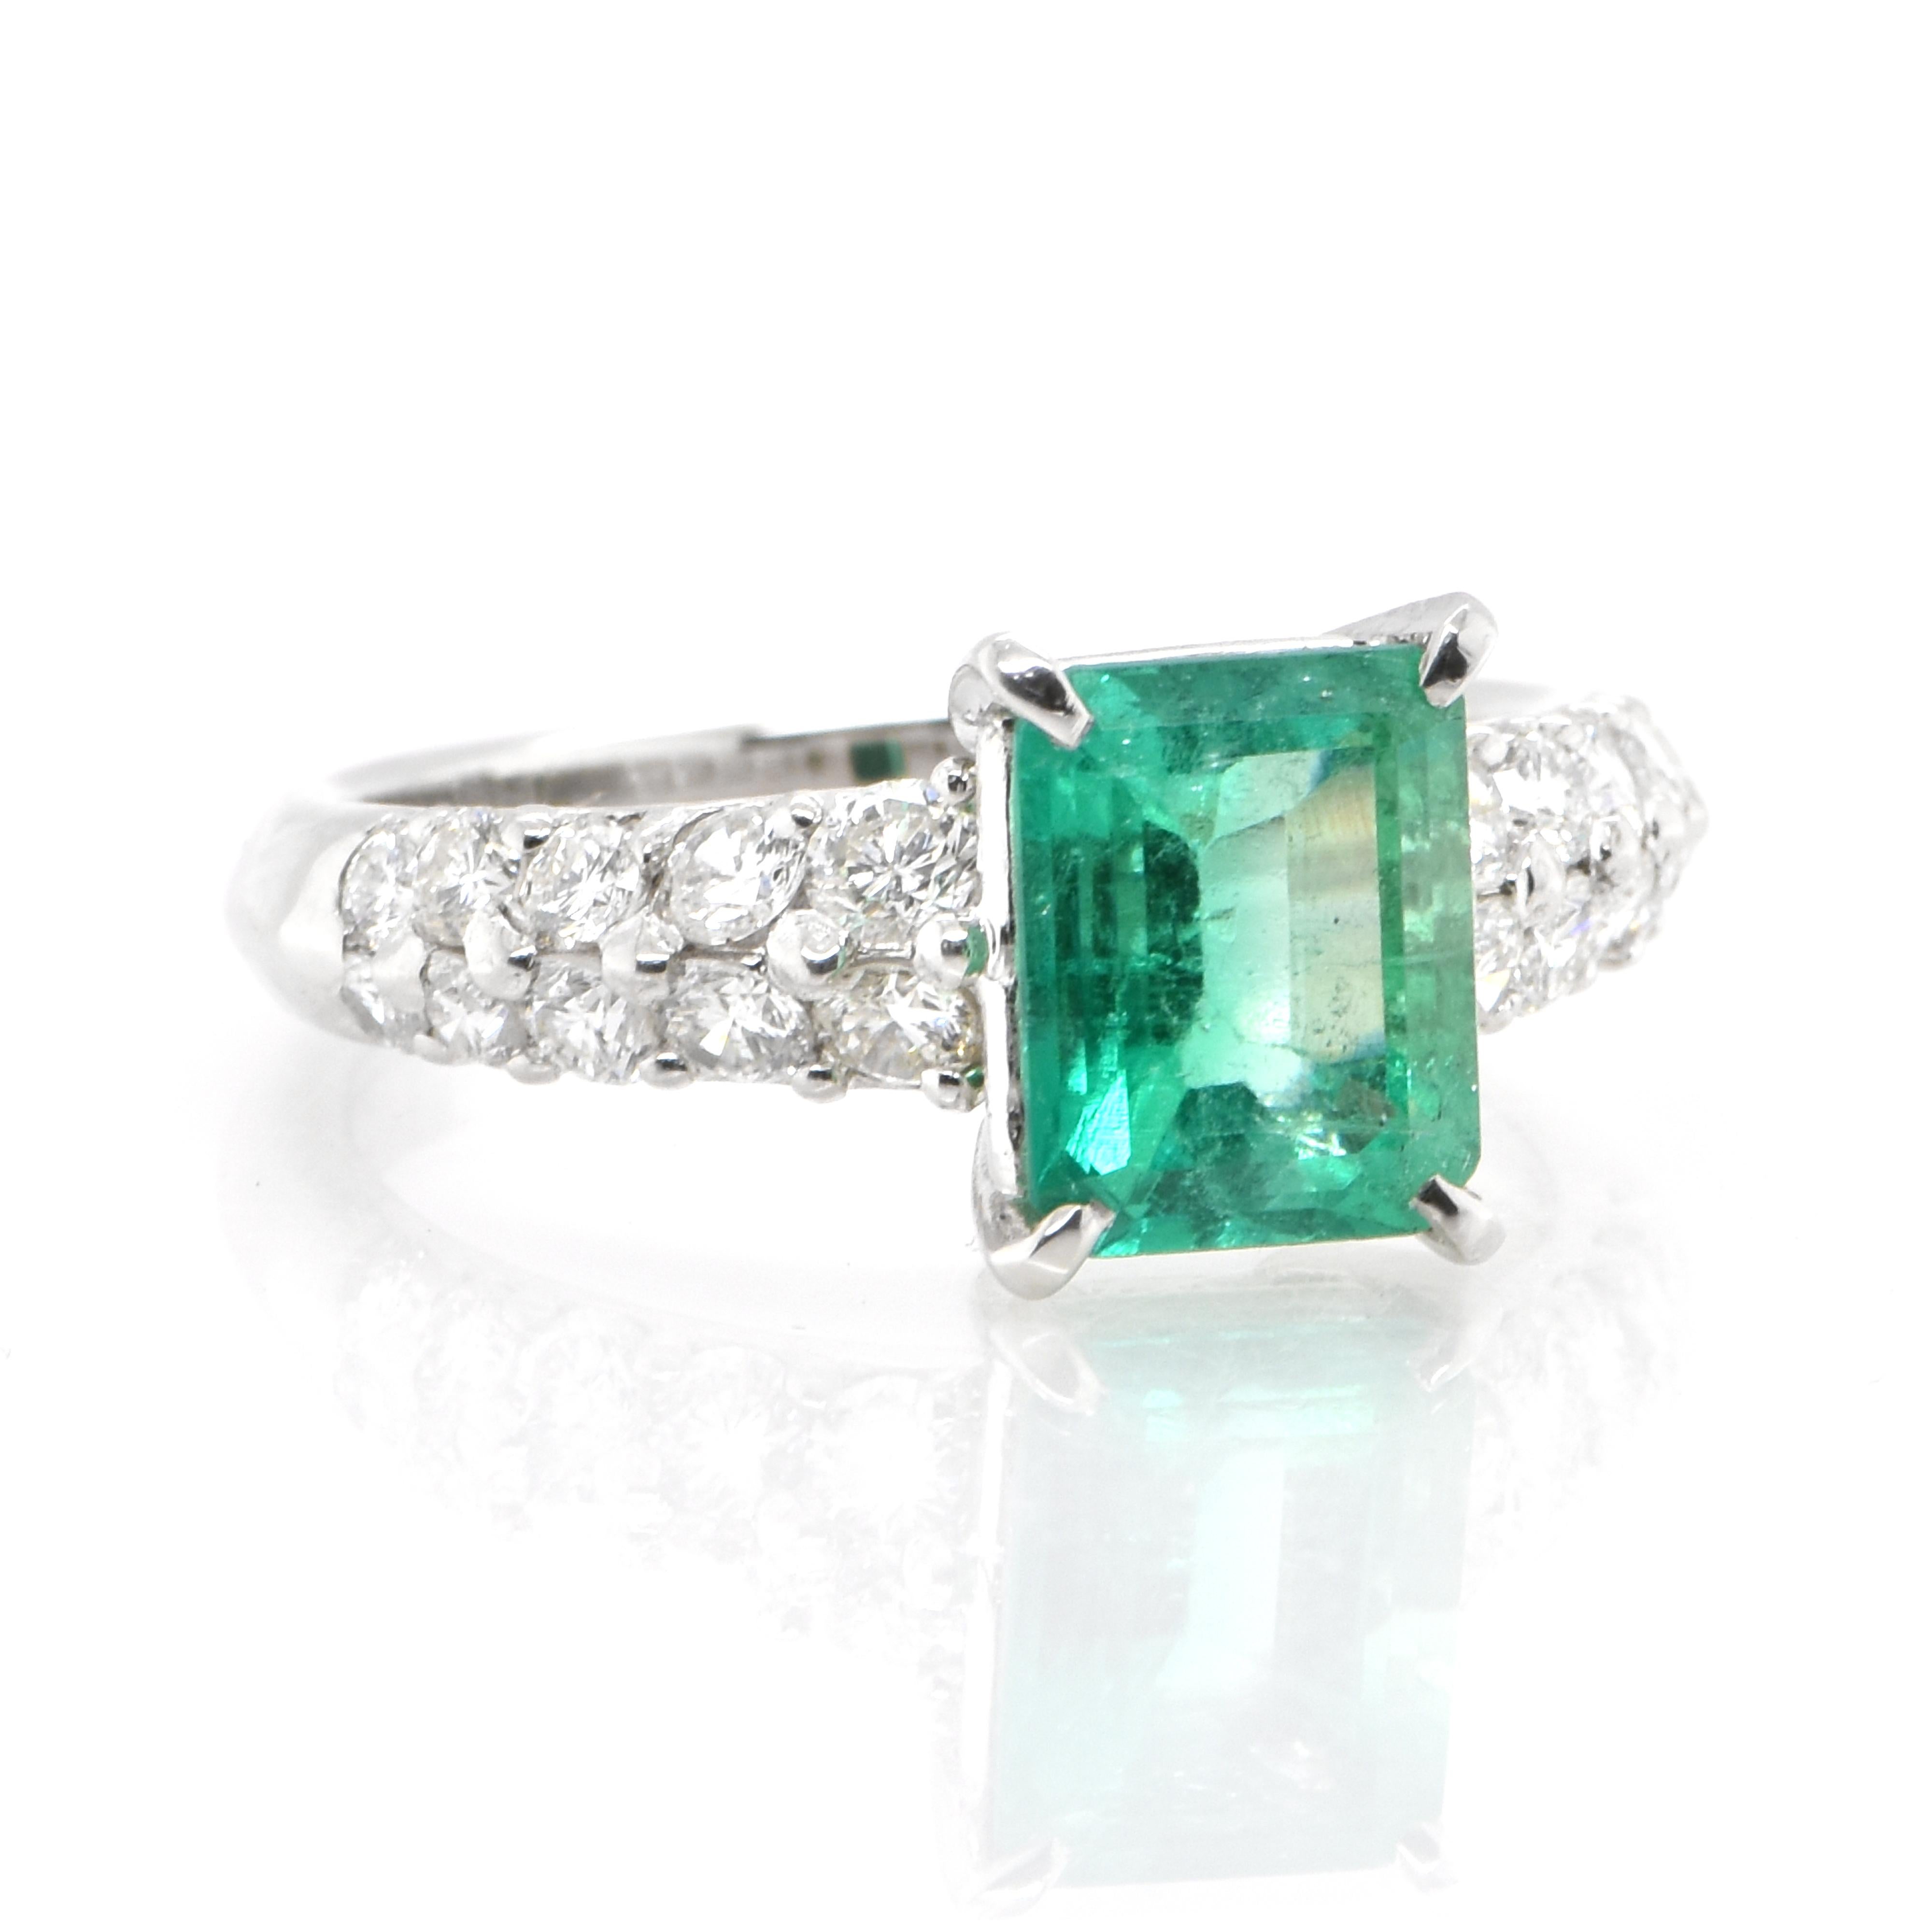 Modern 1.65 Carat Natural Colombian Emerald and Diamond Ring Set in Platinum